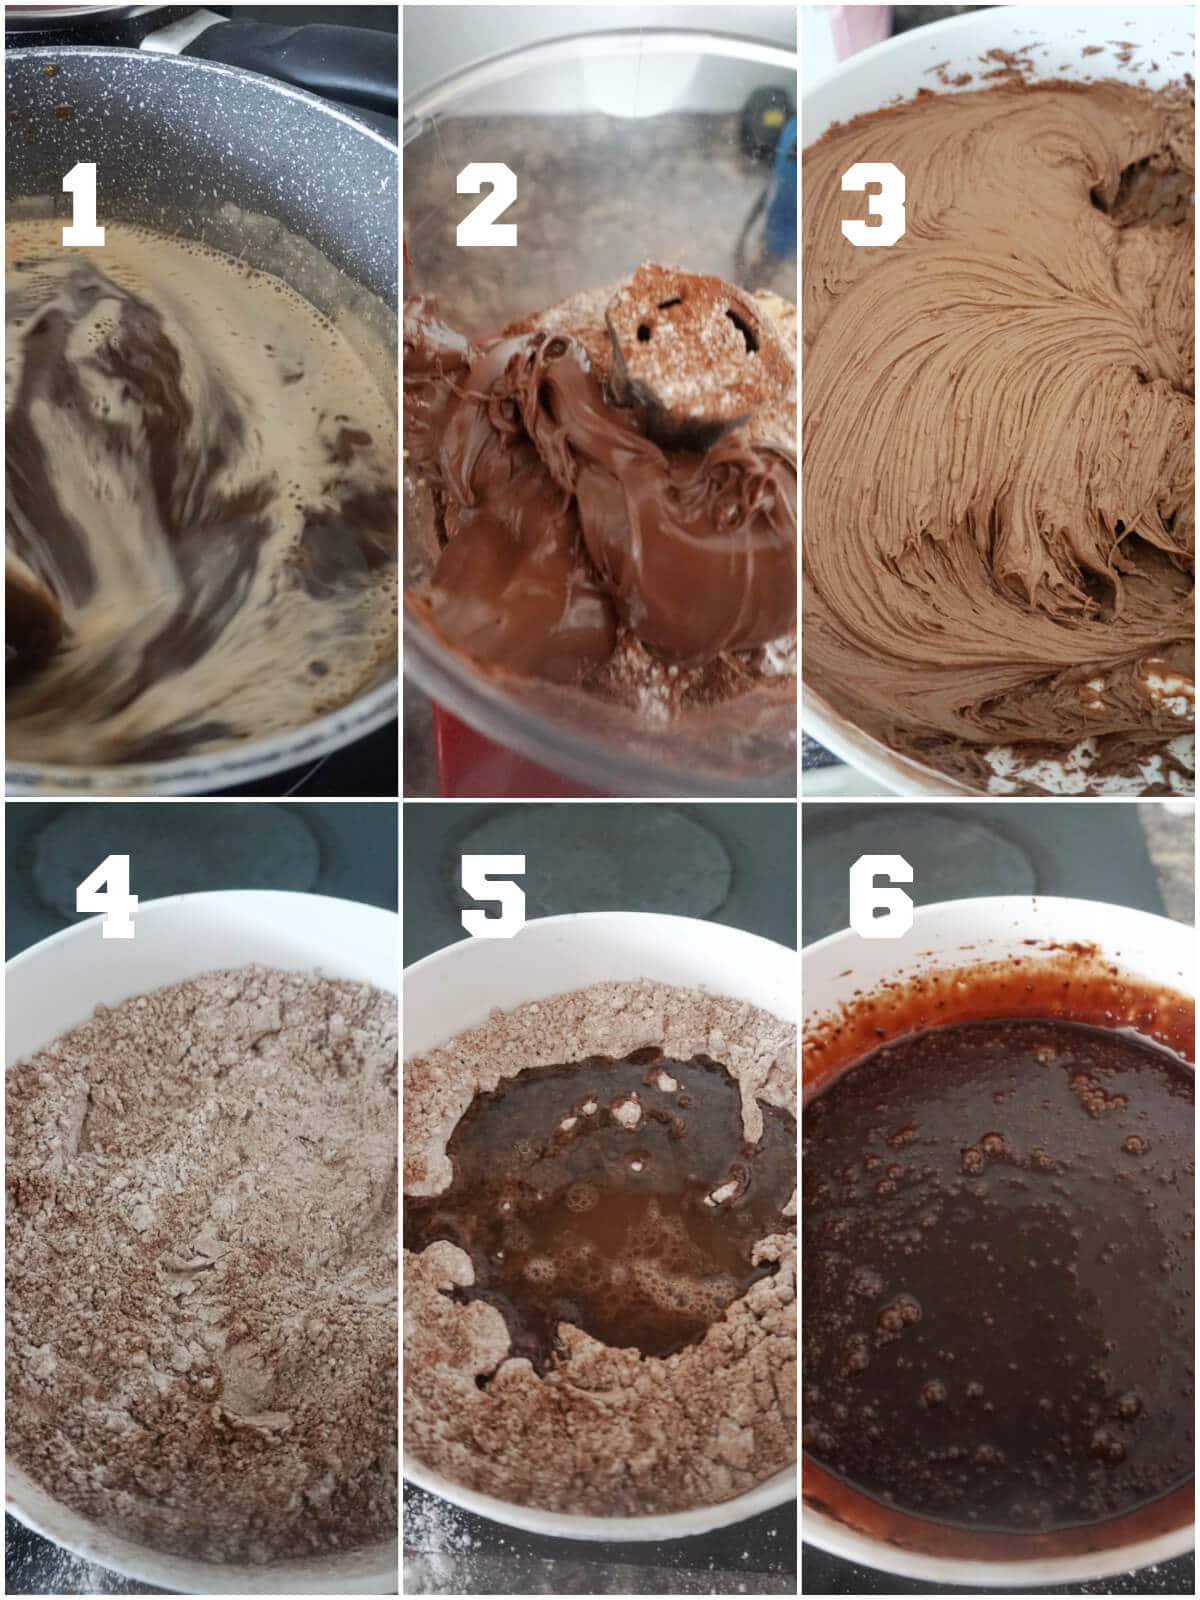 Collage of 6 photos to show how to make nutella filling and chocolate glaze